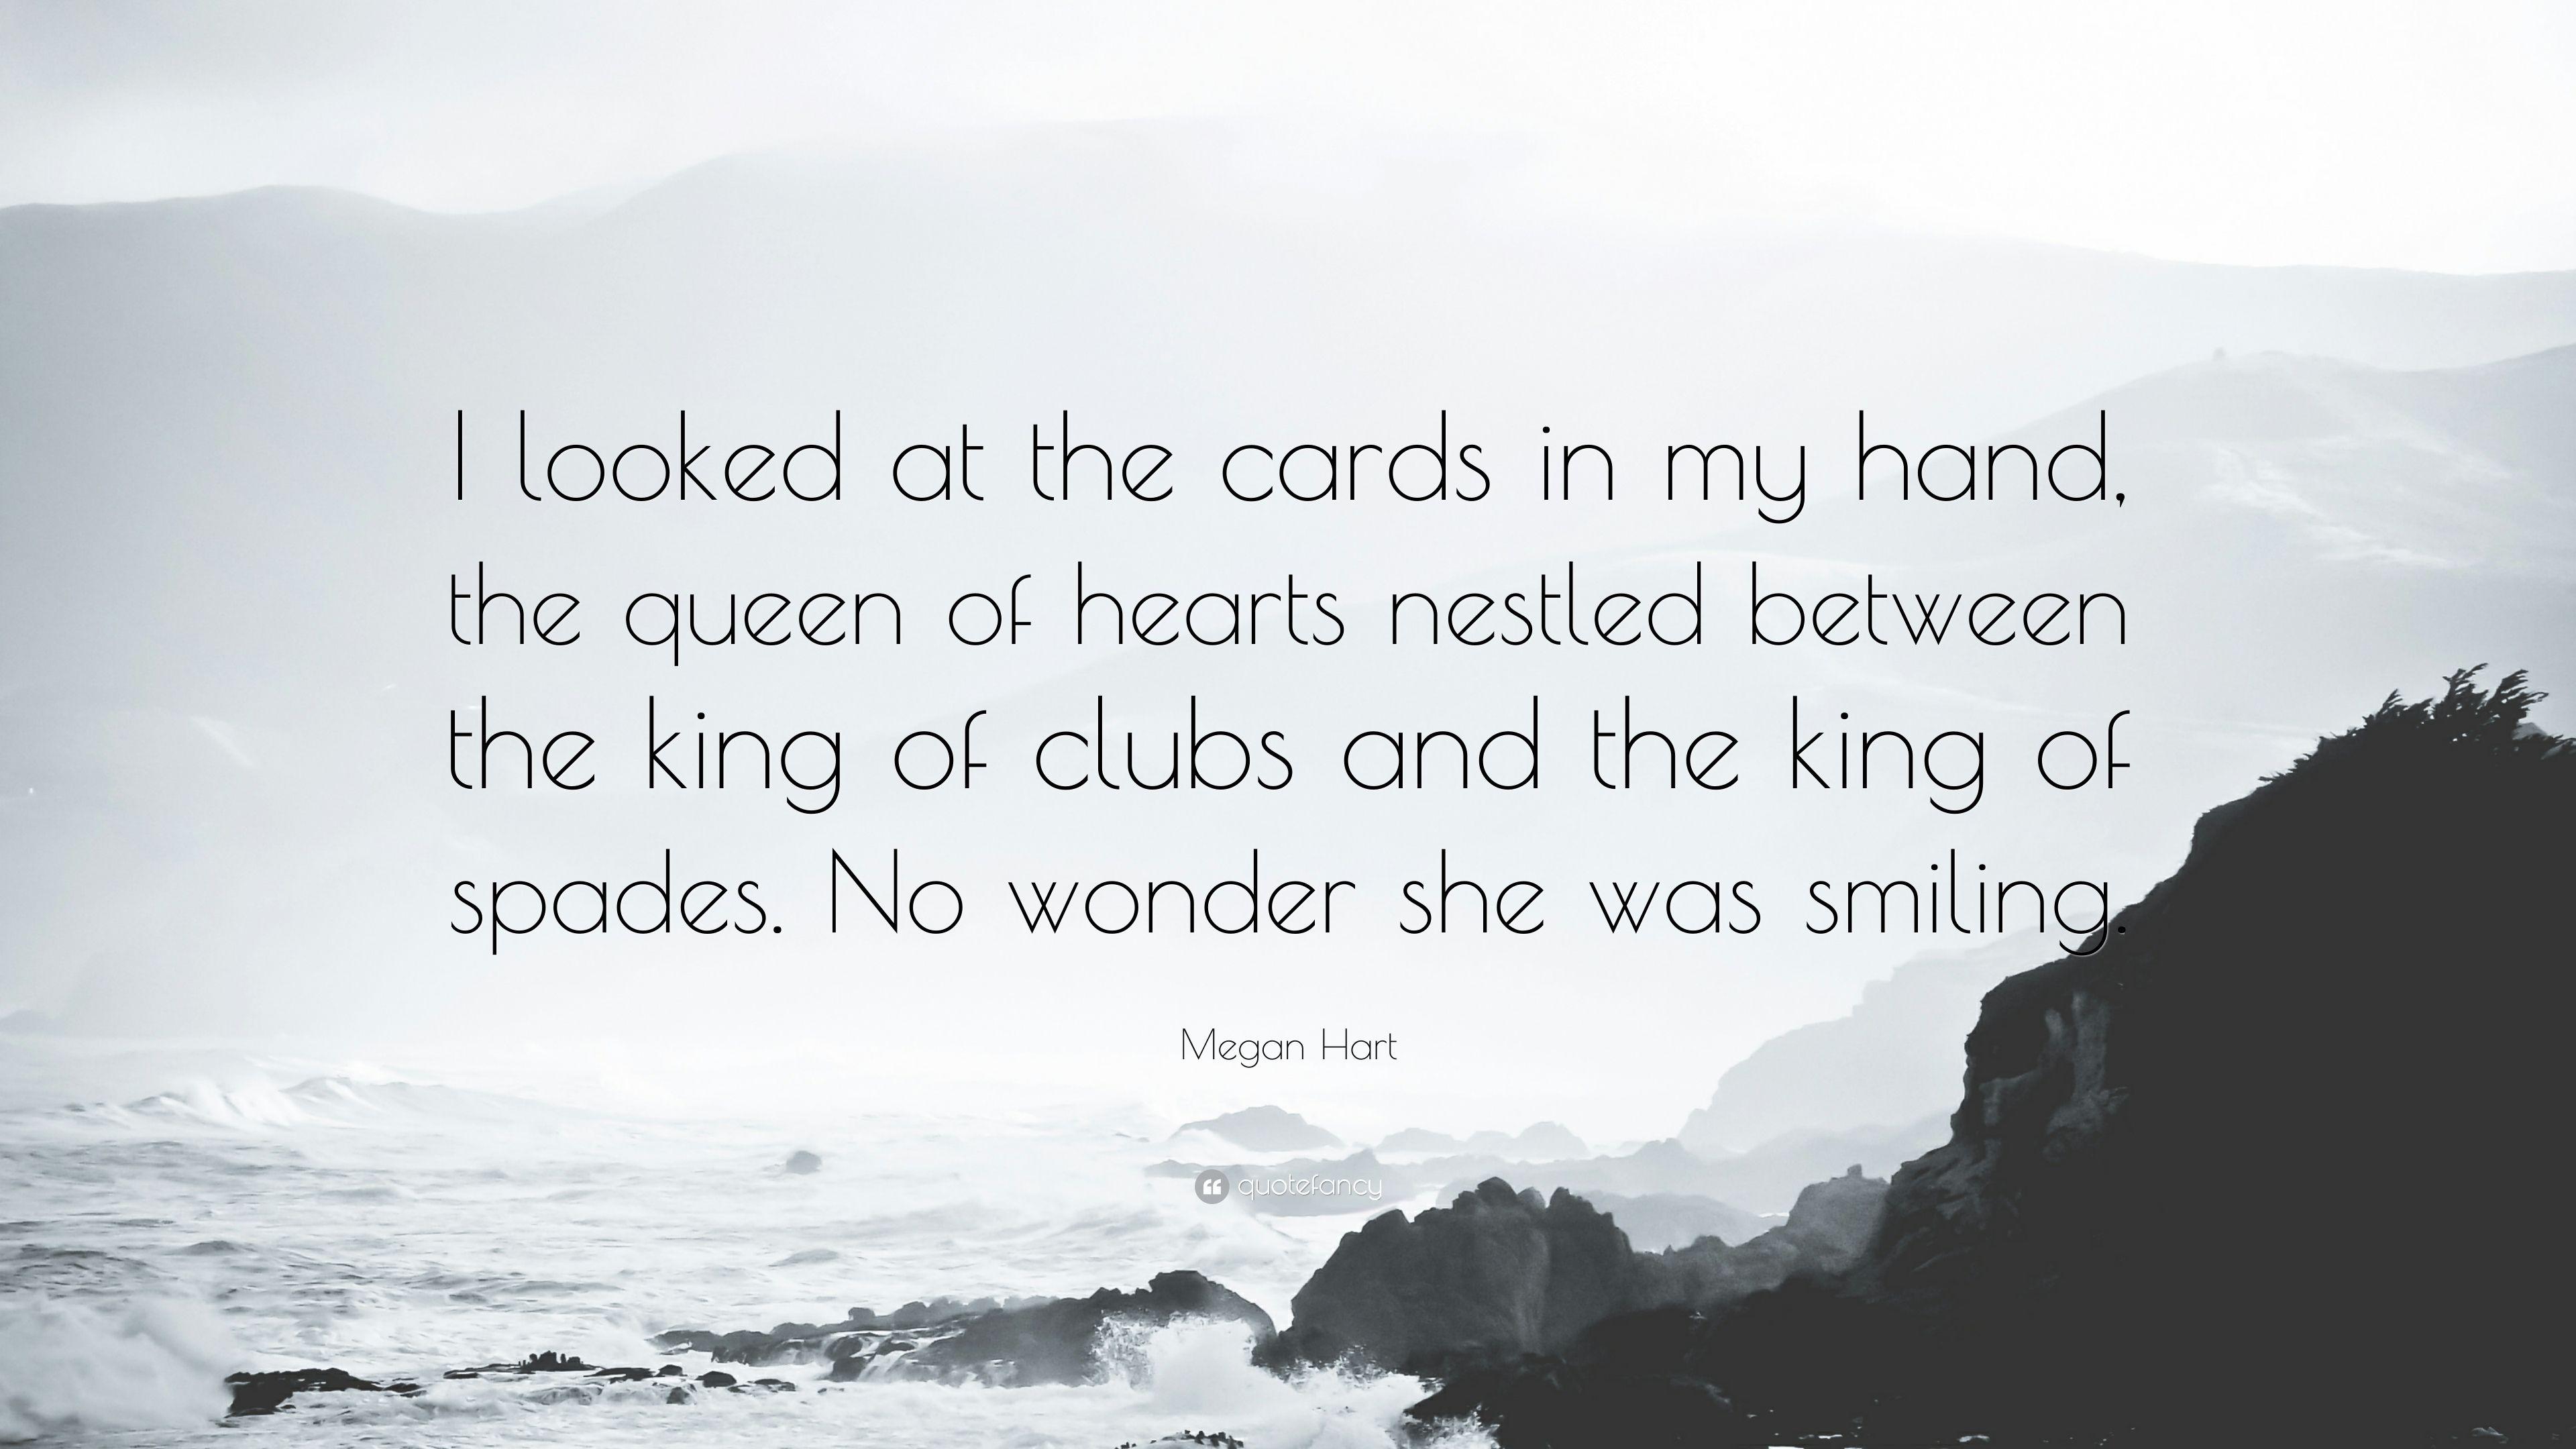 Megan Hart Quote: “I looked at the cards in my hand, the queen